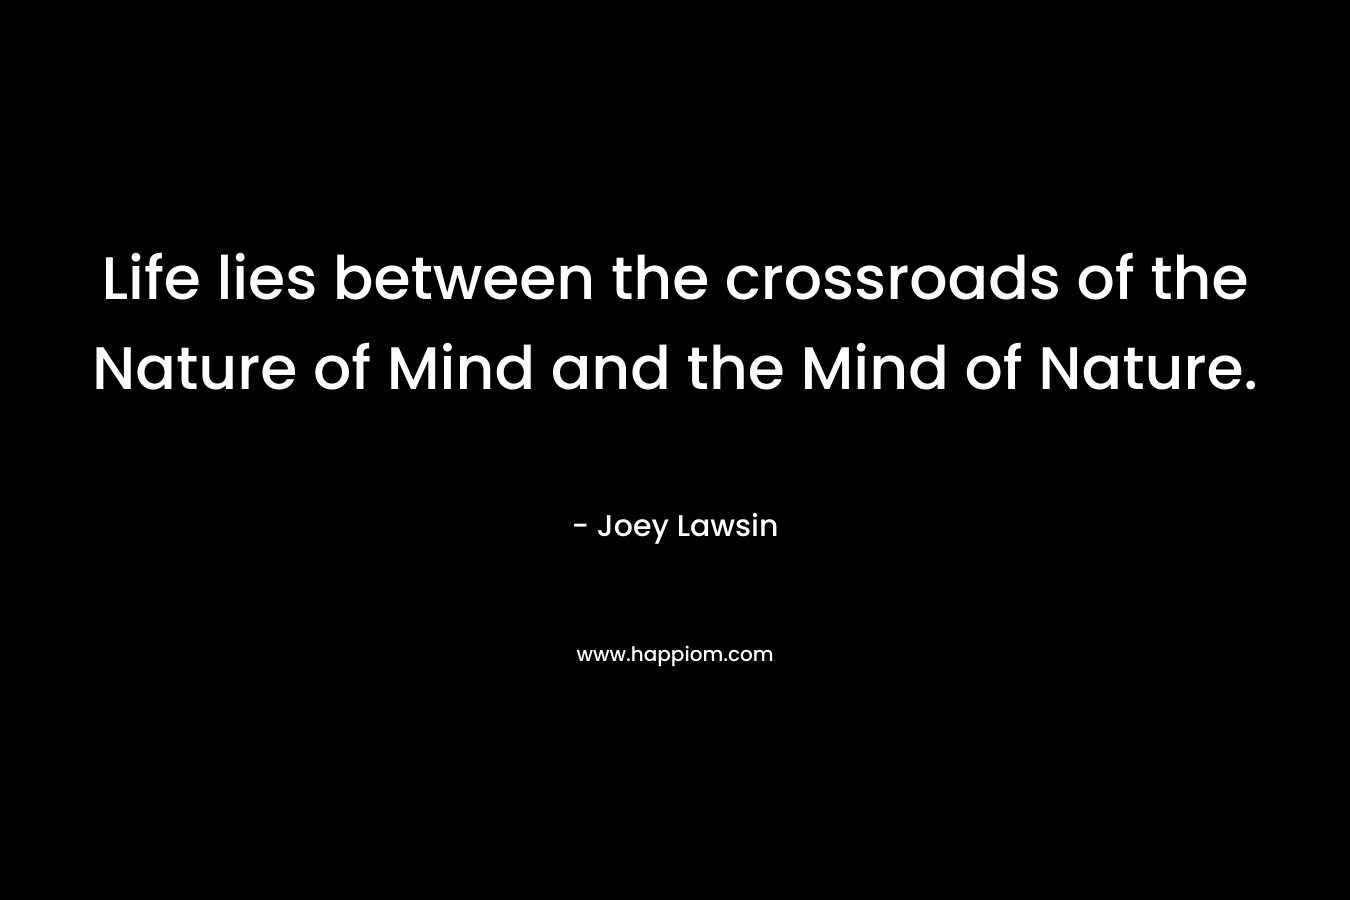 Life lies between the crossroads of the Nature of Mind and the Mind of Nature. – Joey Lawsin